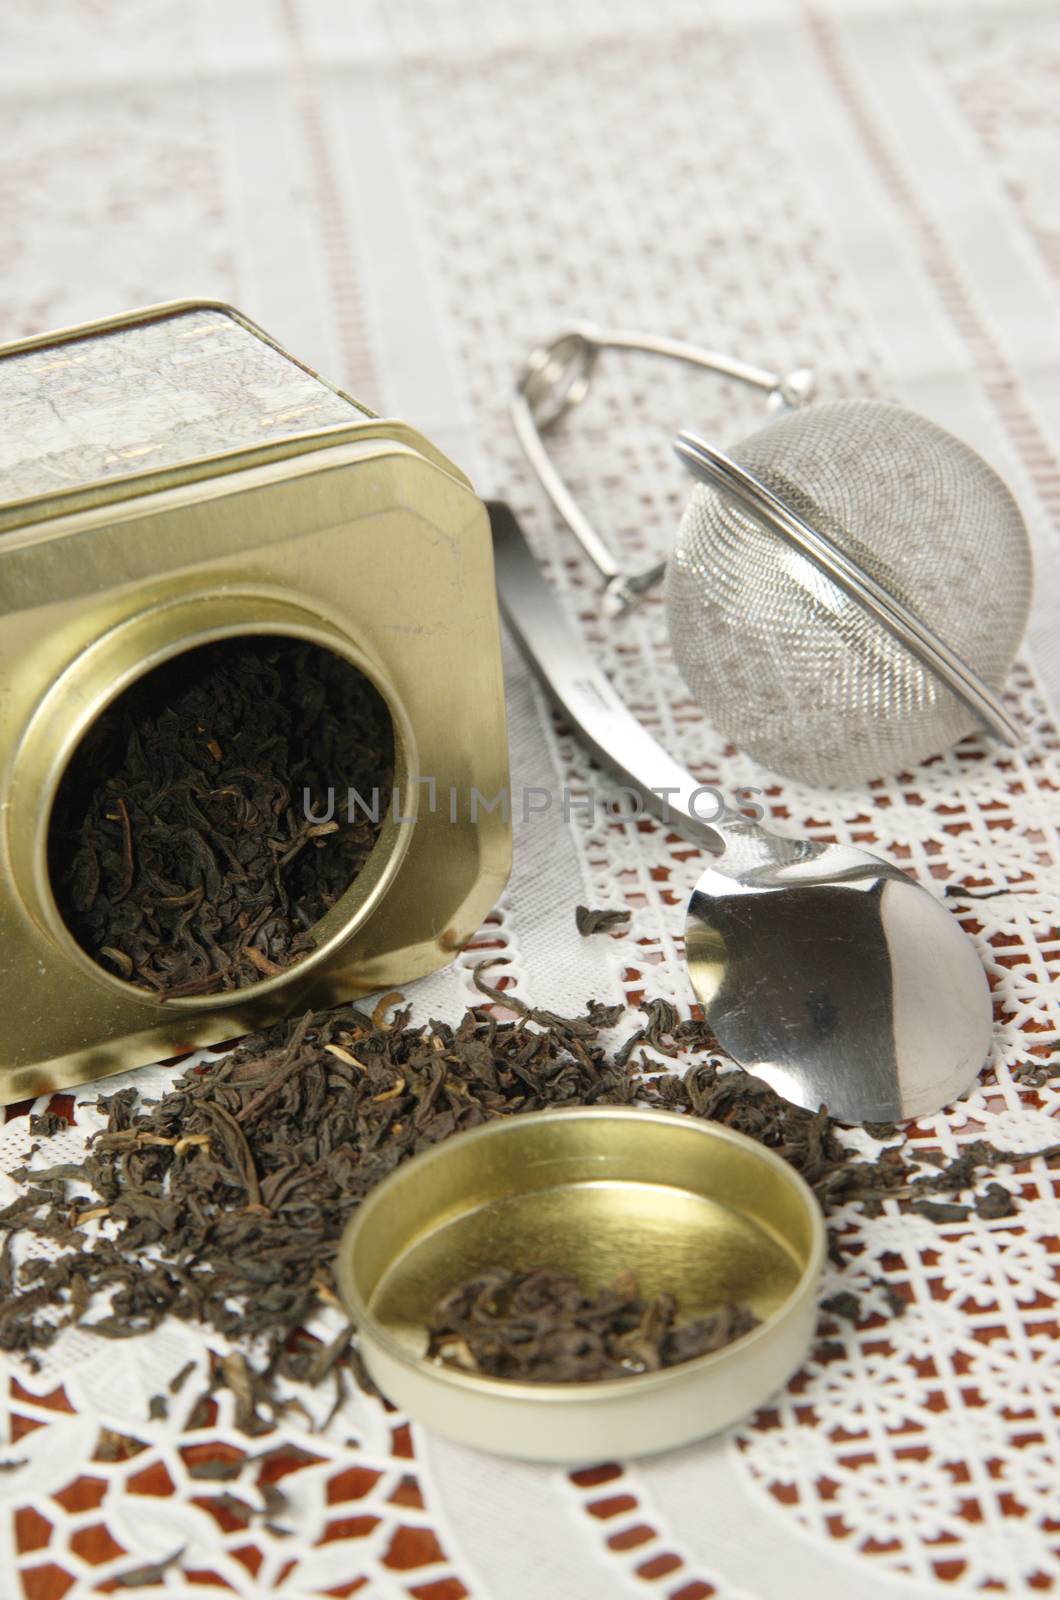 A silver spoon next to two jars of tea